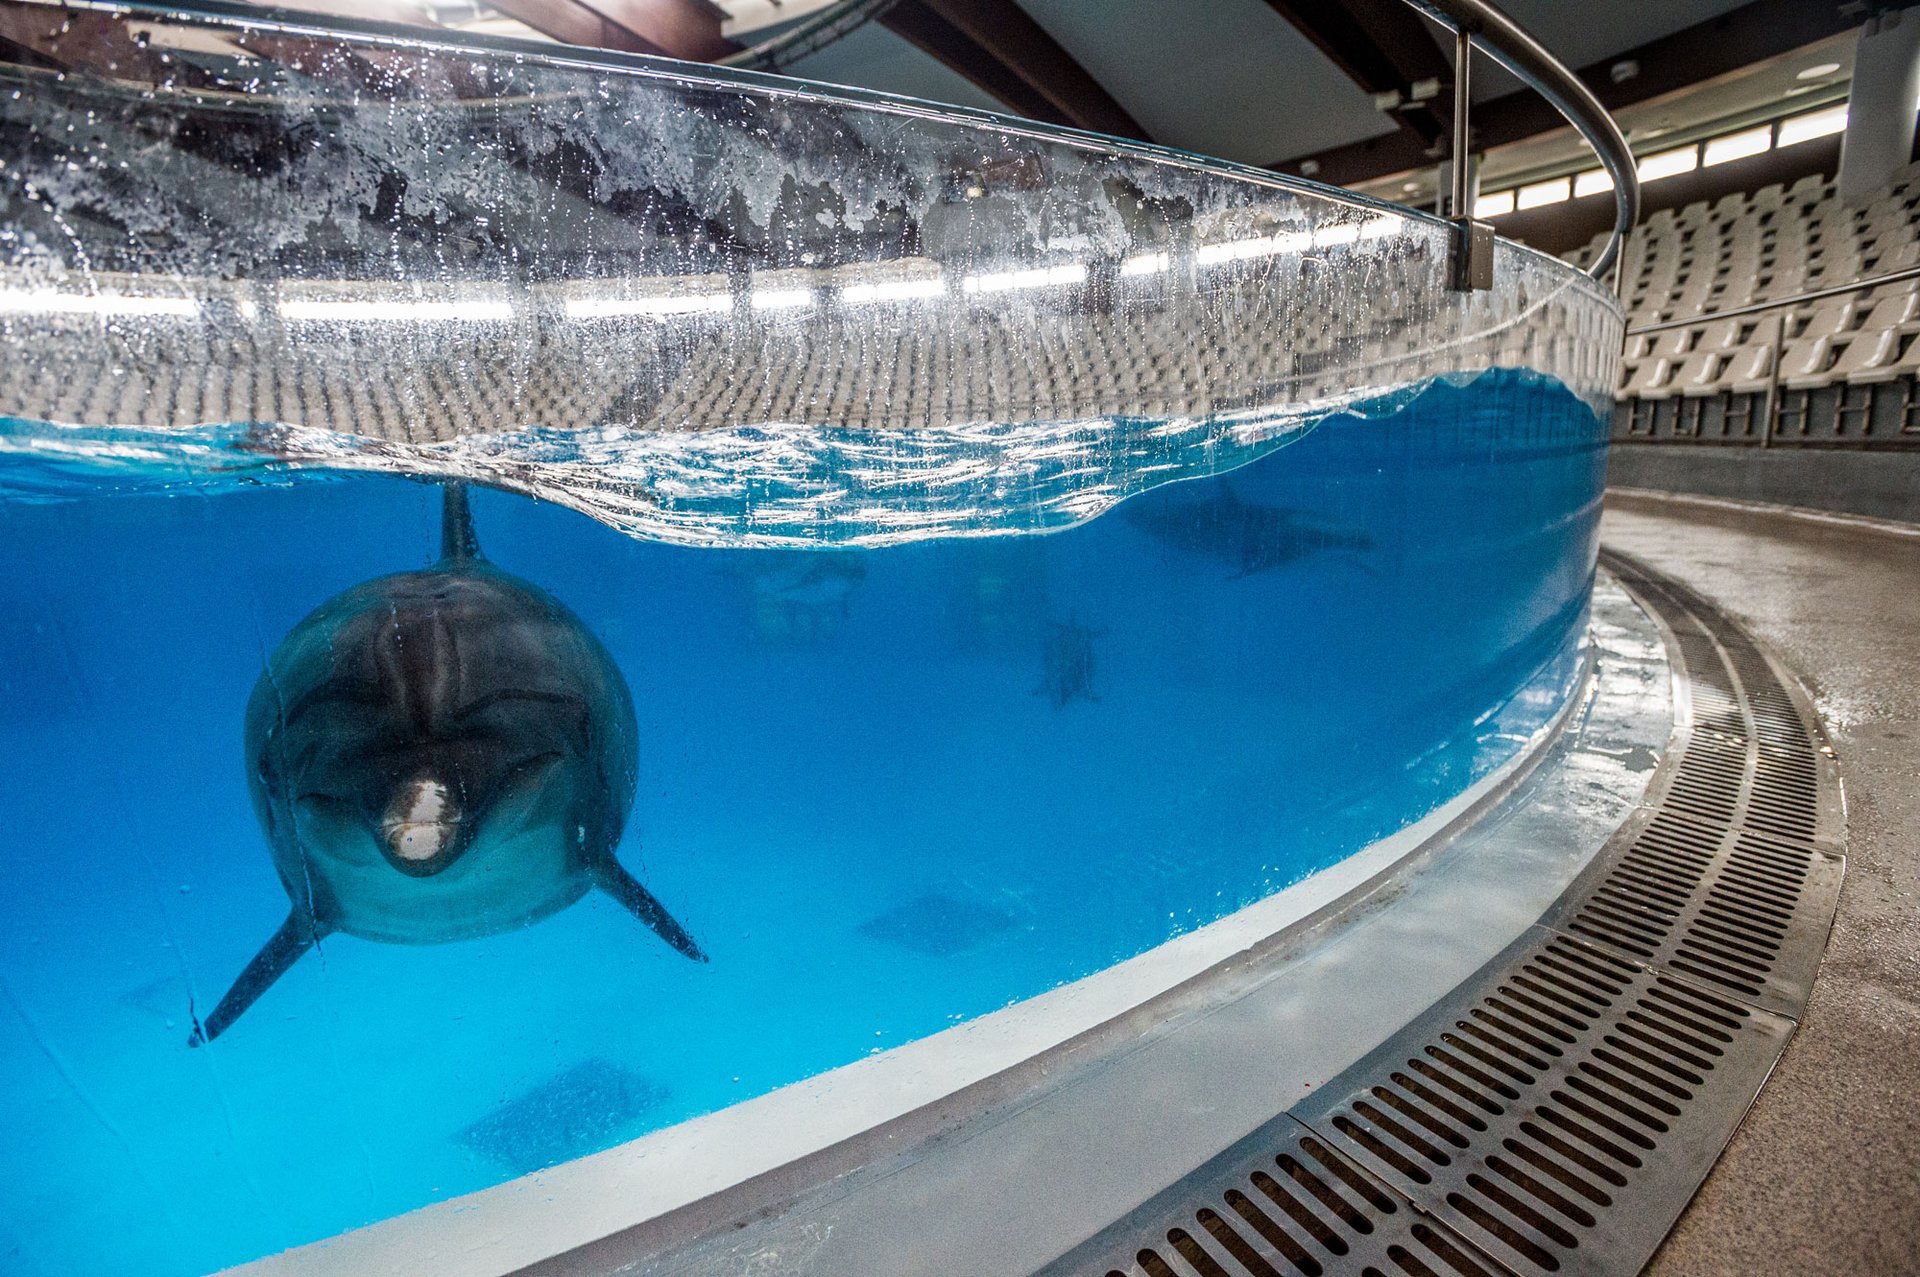 Dolphin captive in tank at entertainment venue